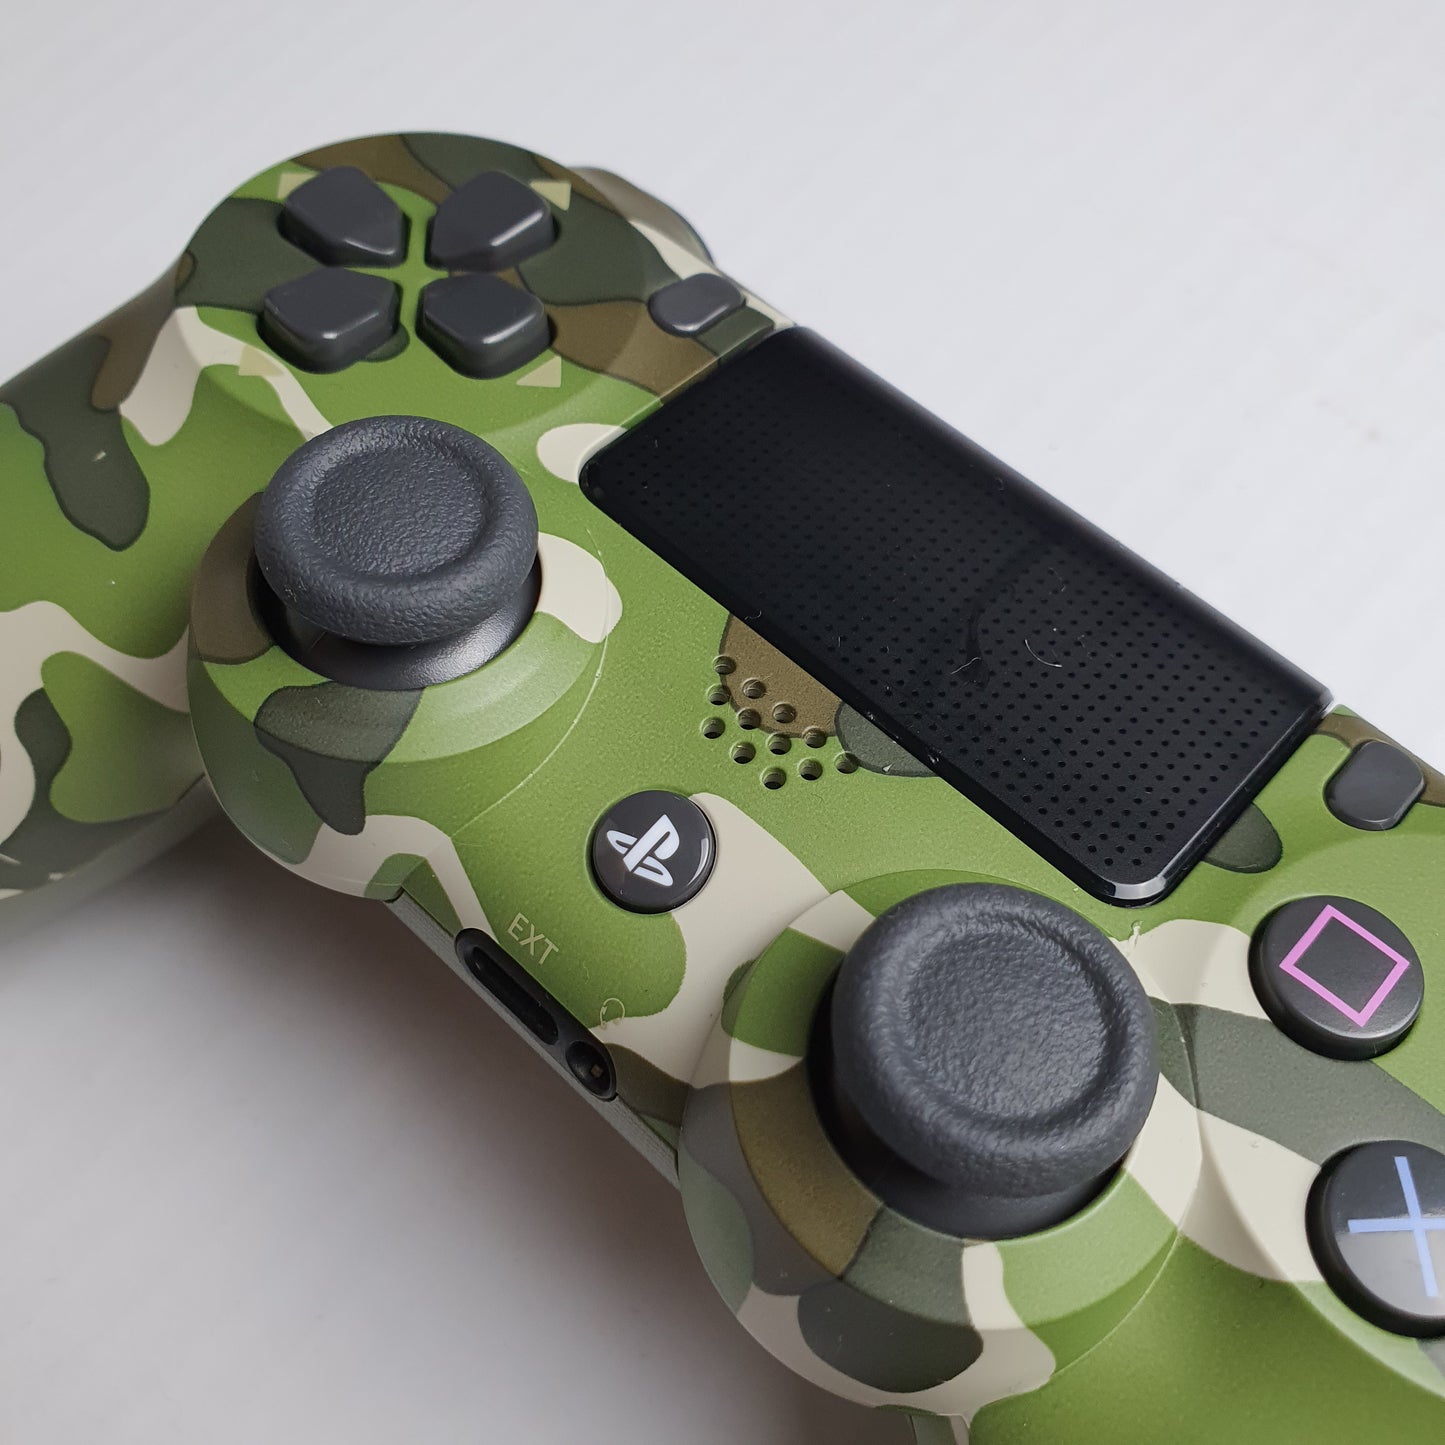 Official Sony PlayStation PS4 Green Camouflage Dualshock 4 Wireless Controller